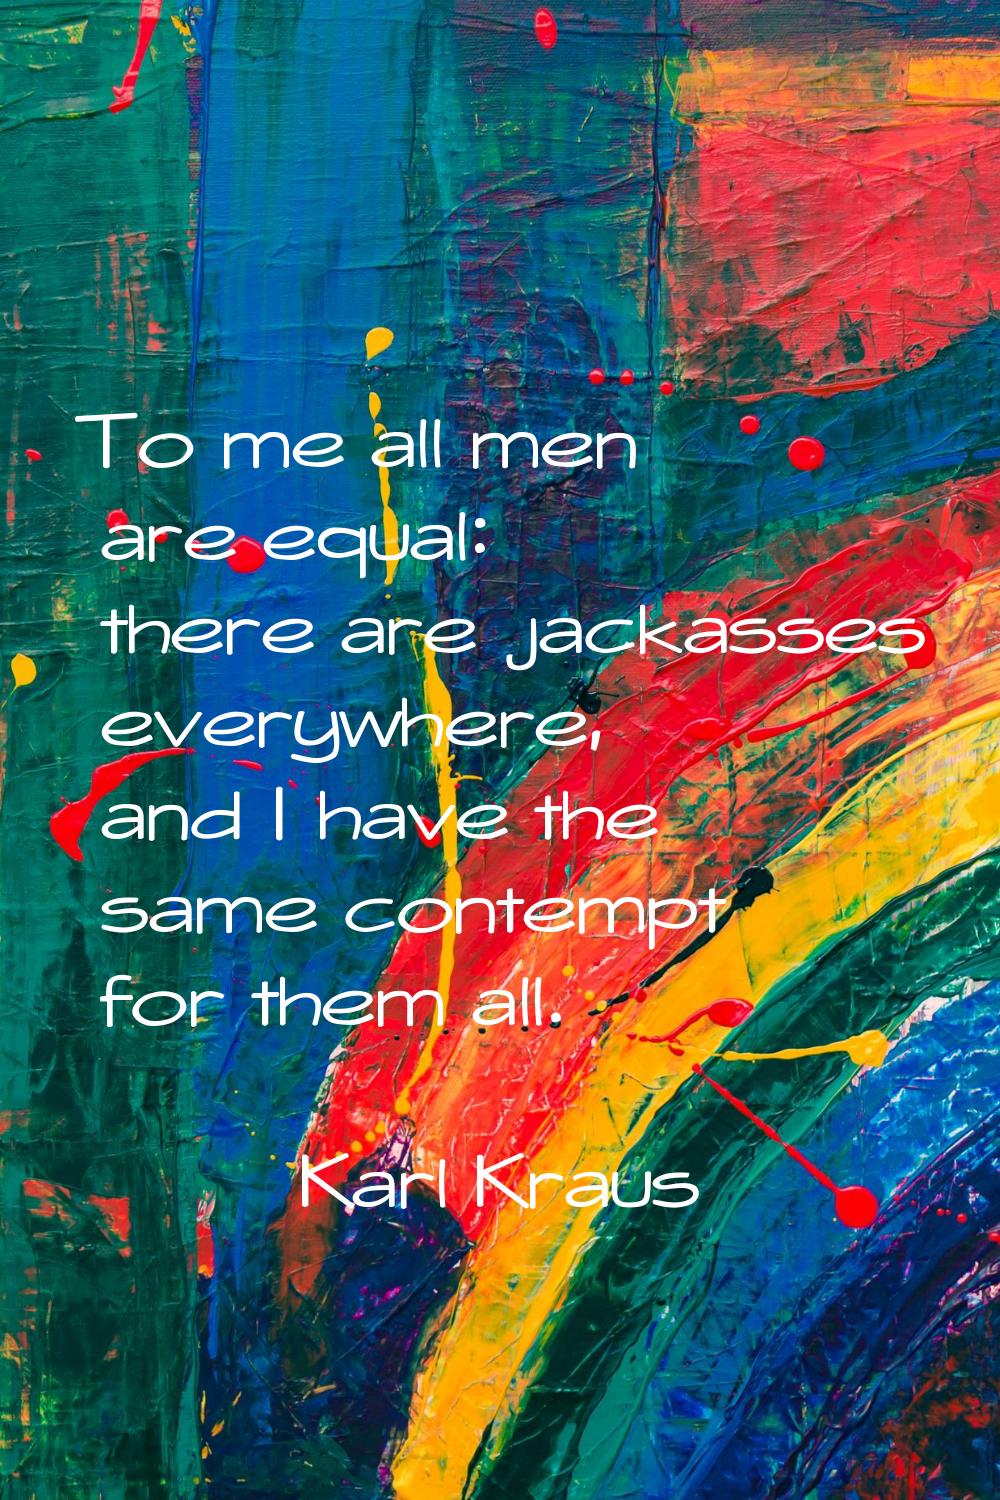 To me all men are equal: there are jackasses everywhere, and I have the same contempt for them all.